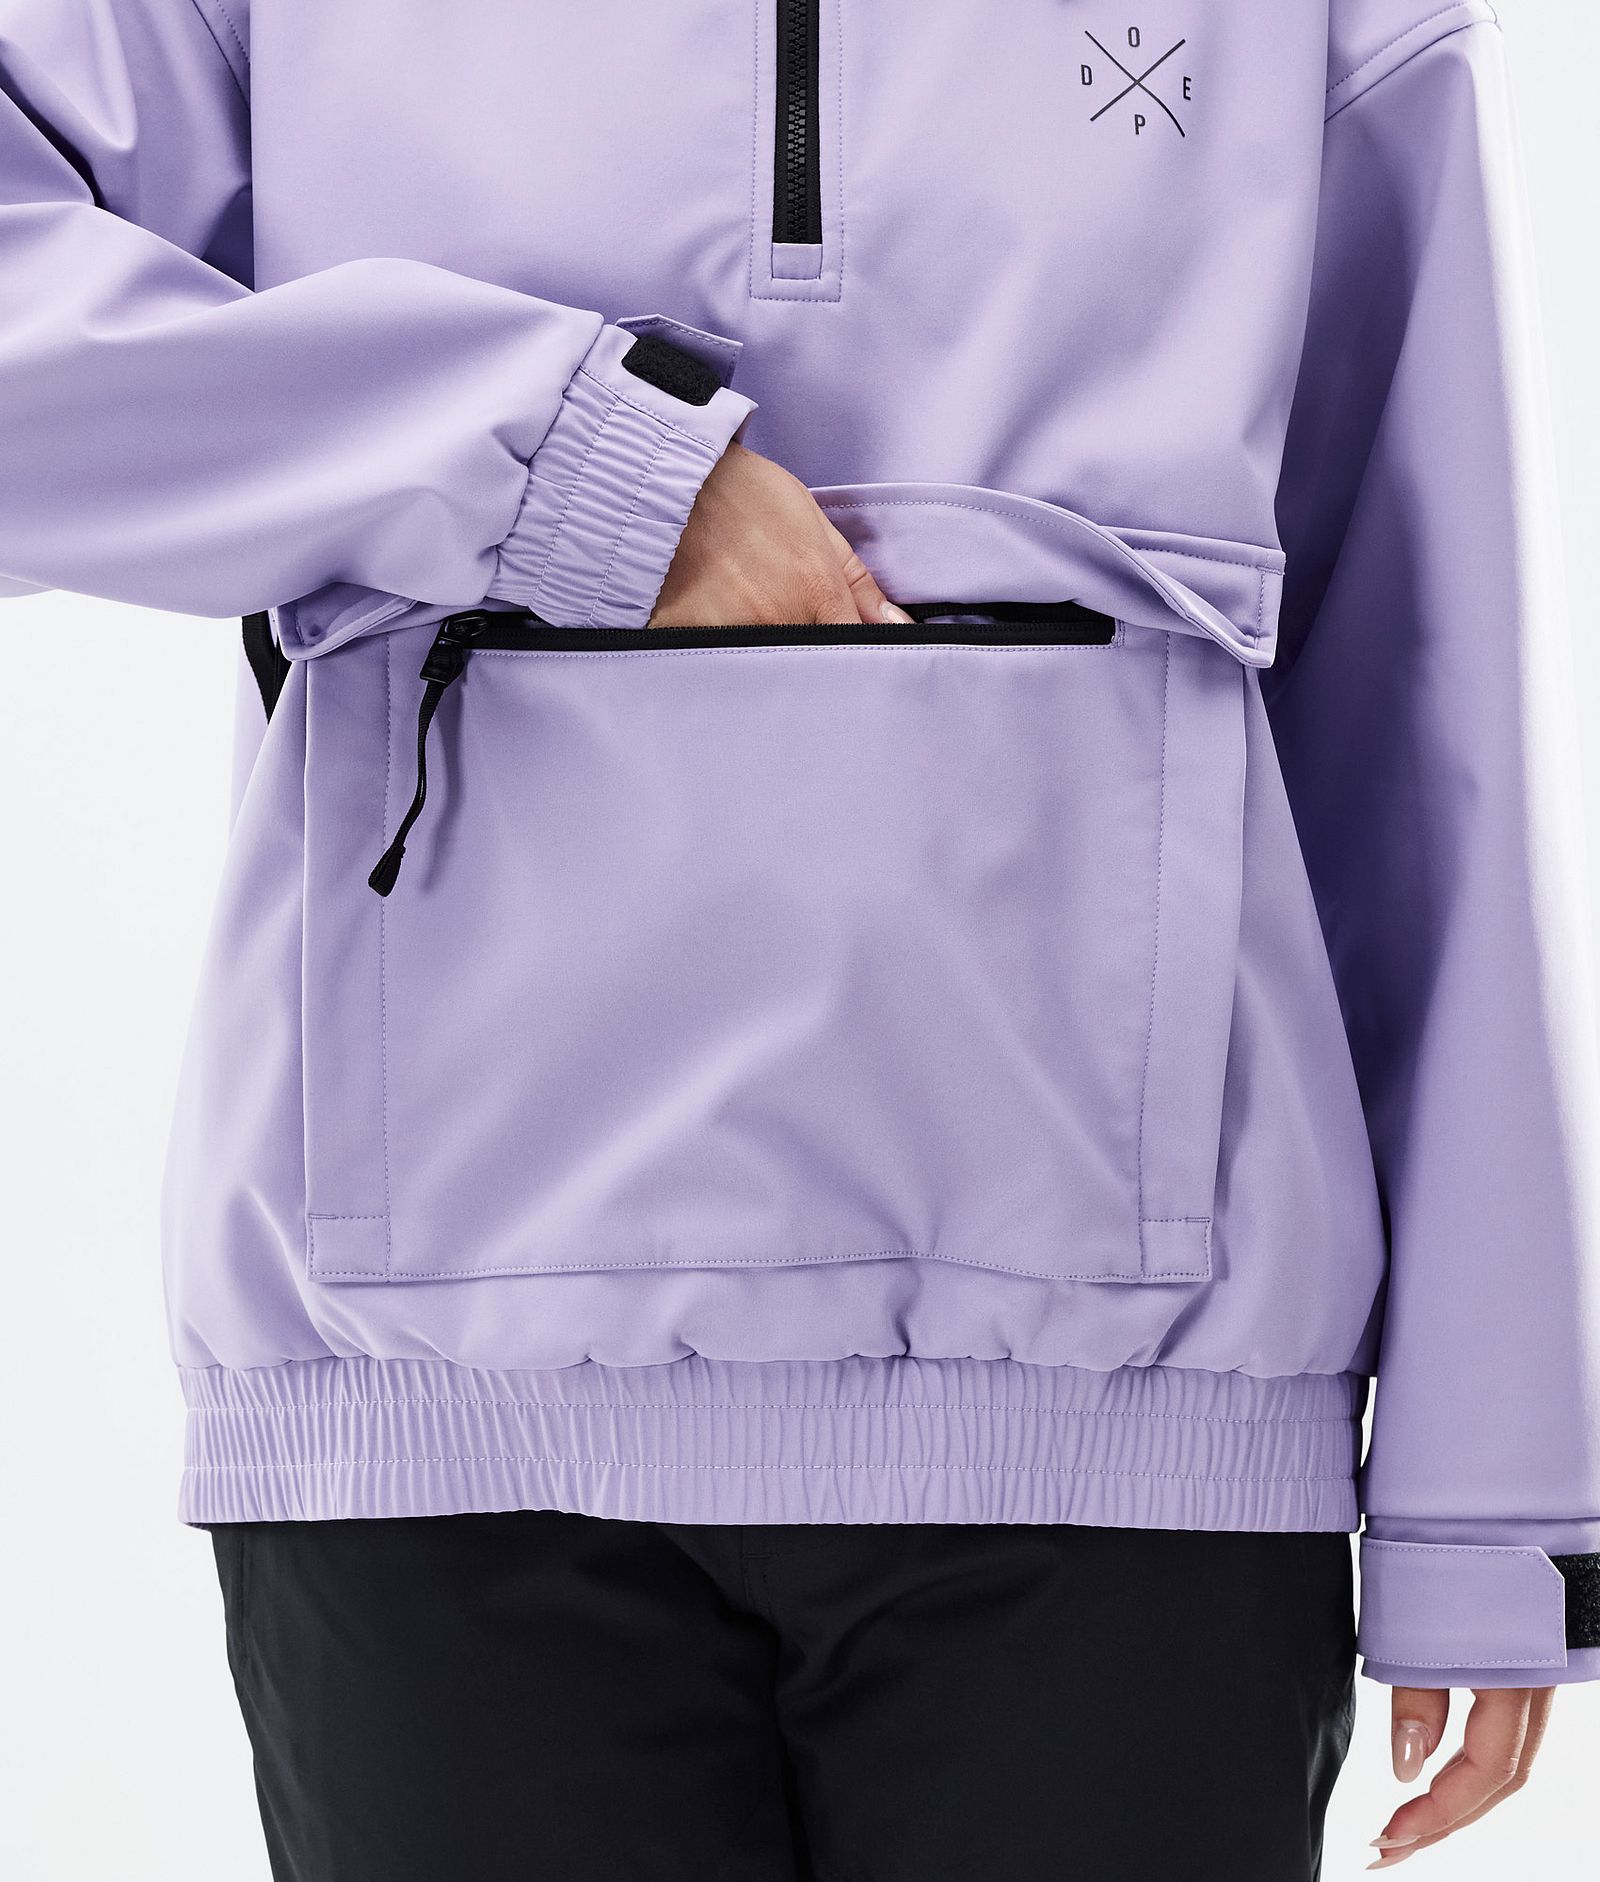 Dope Cyclone W Snowboard Jacket Women Faded Violet, Image 8 of 8